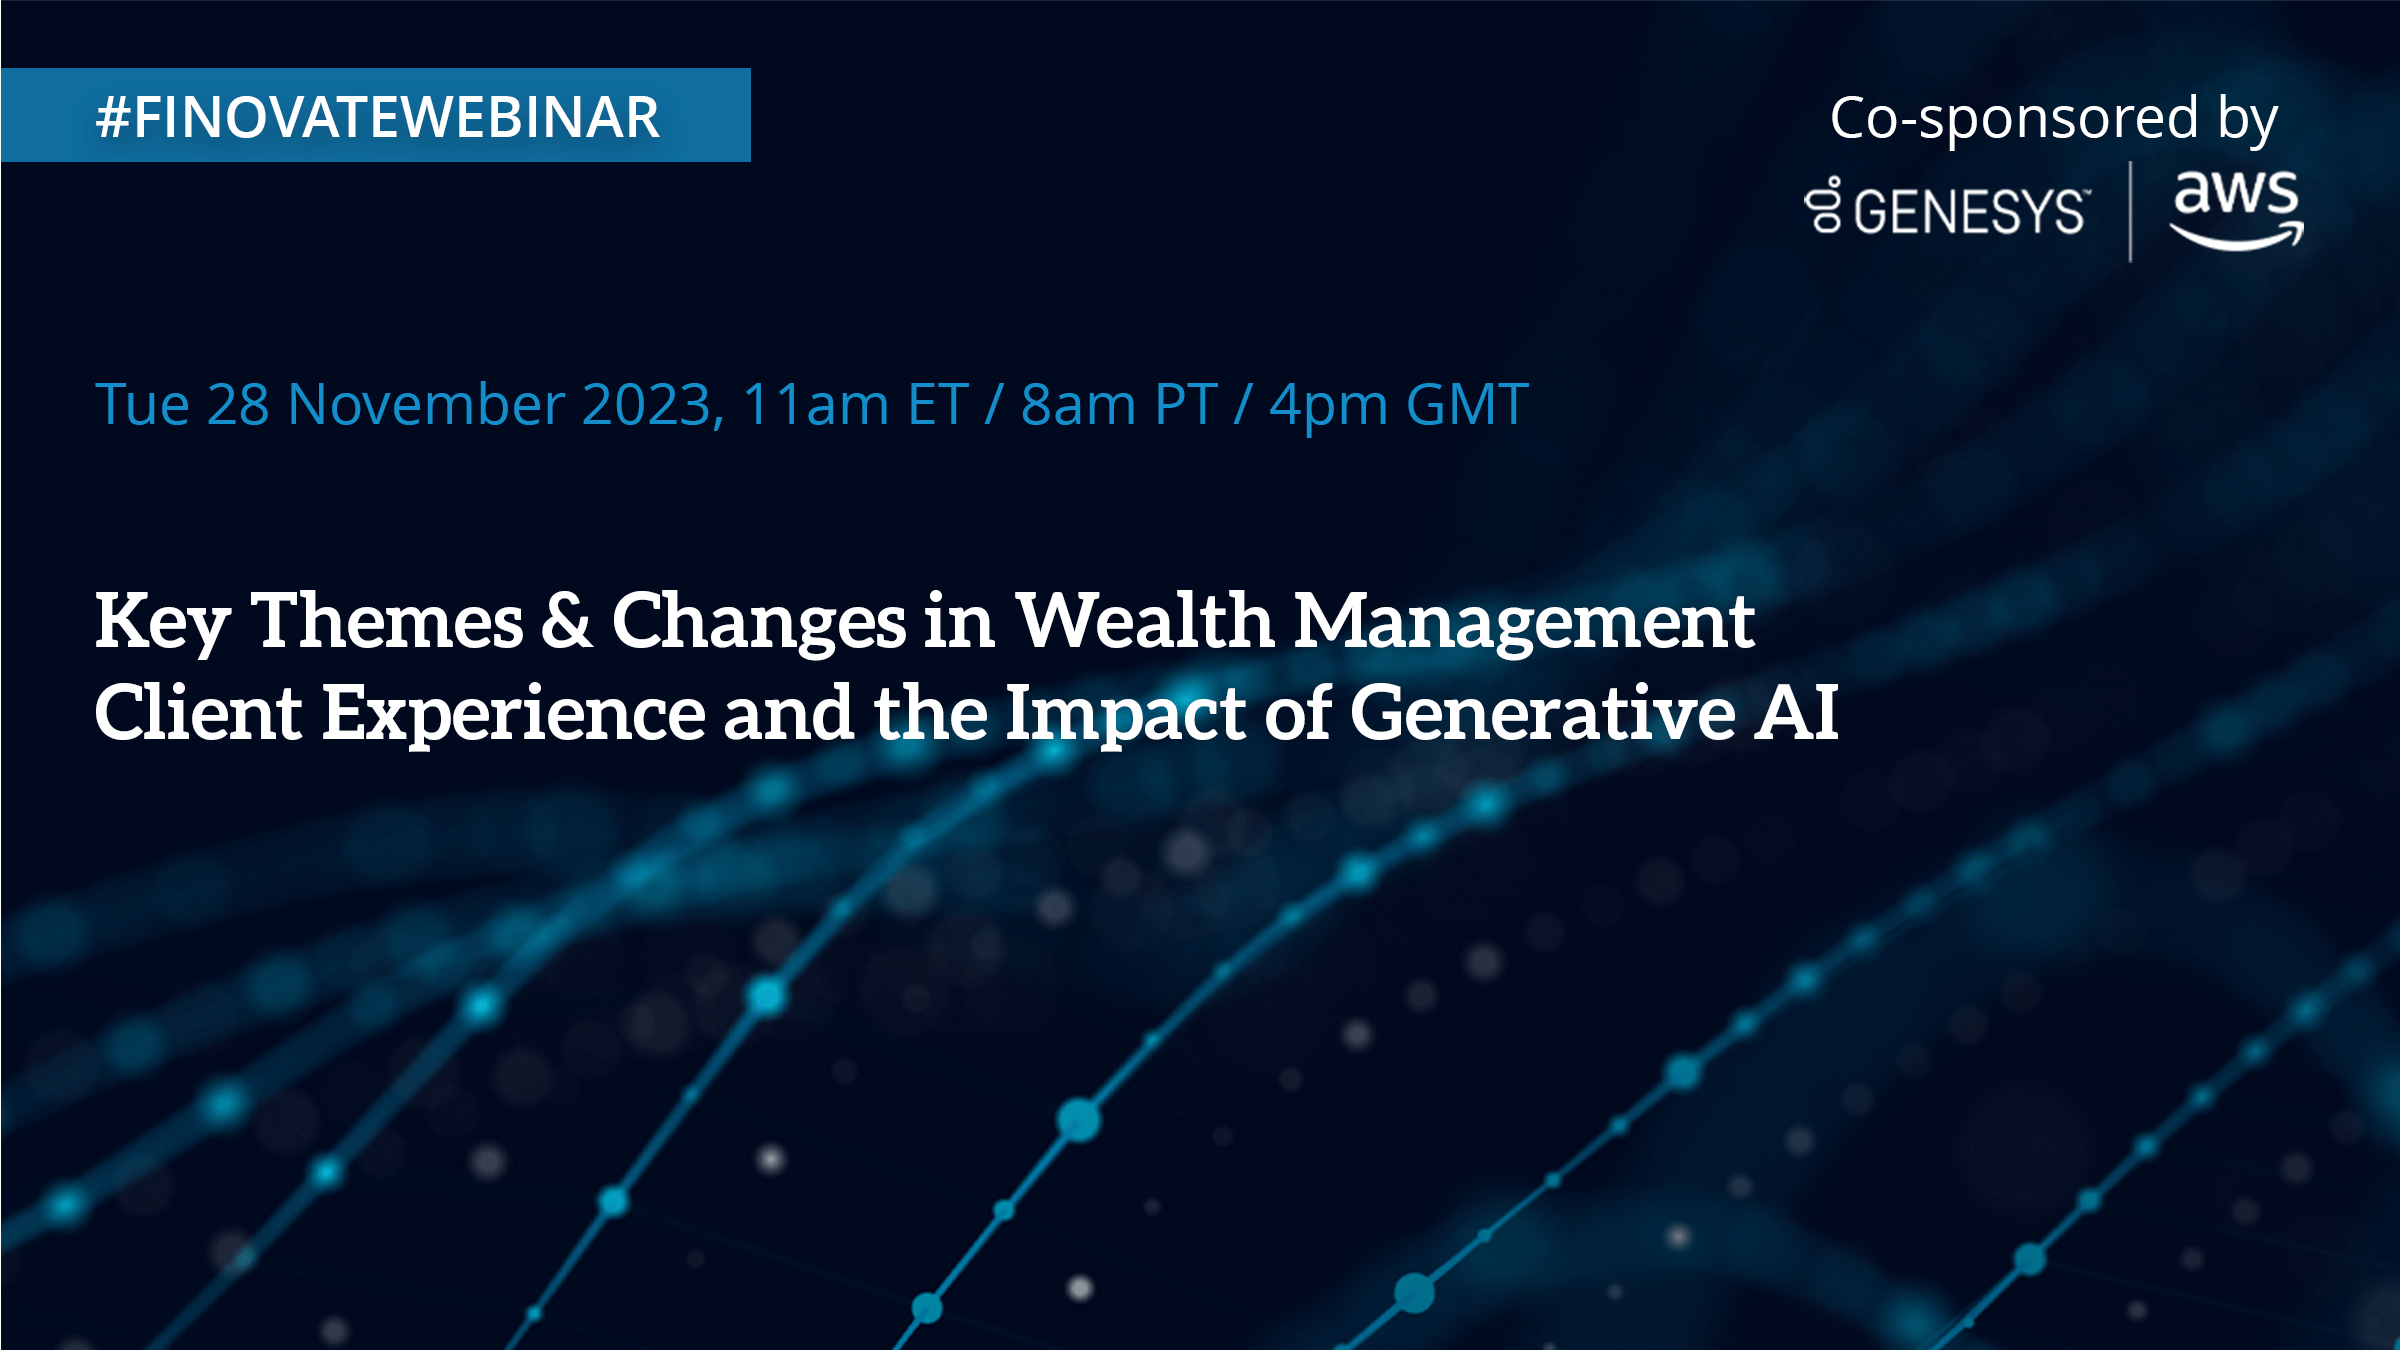 Key Themes & Changes in Wealth Management Client Experience and the Impact of Generative AI